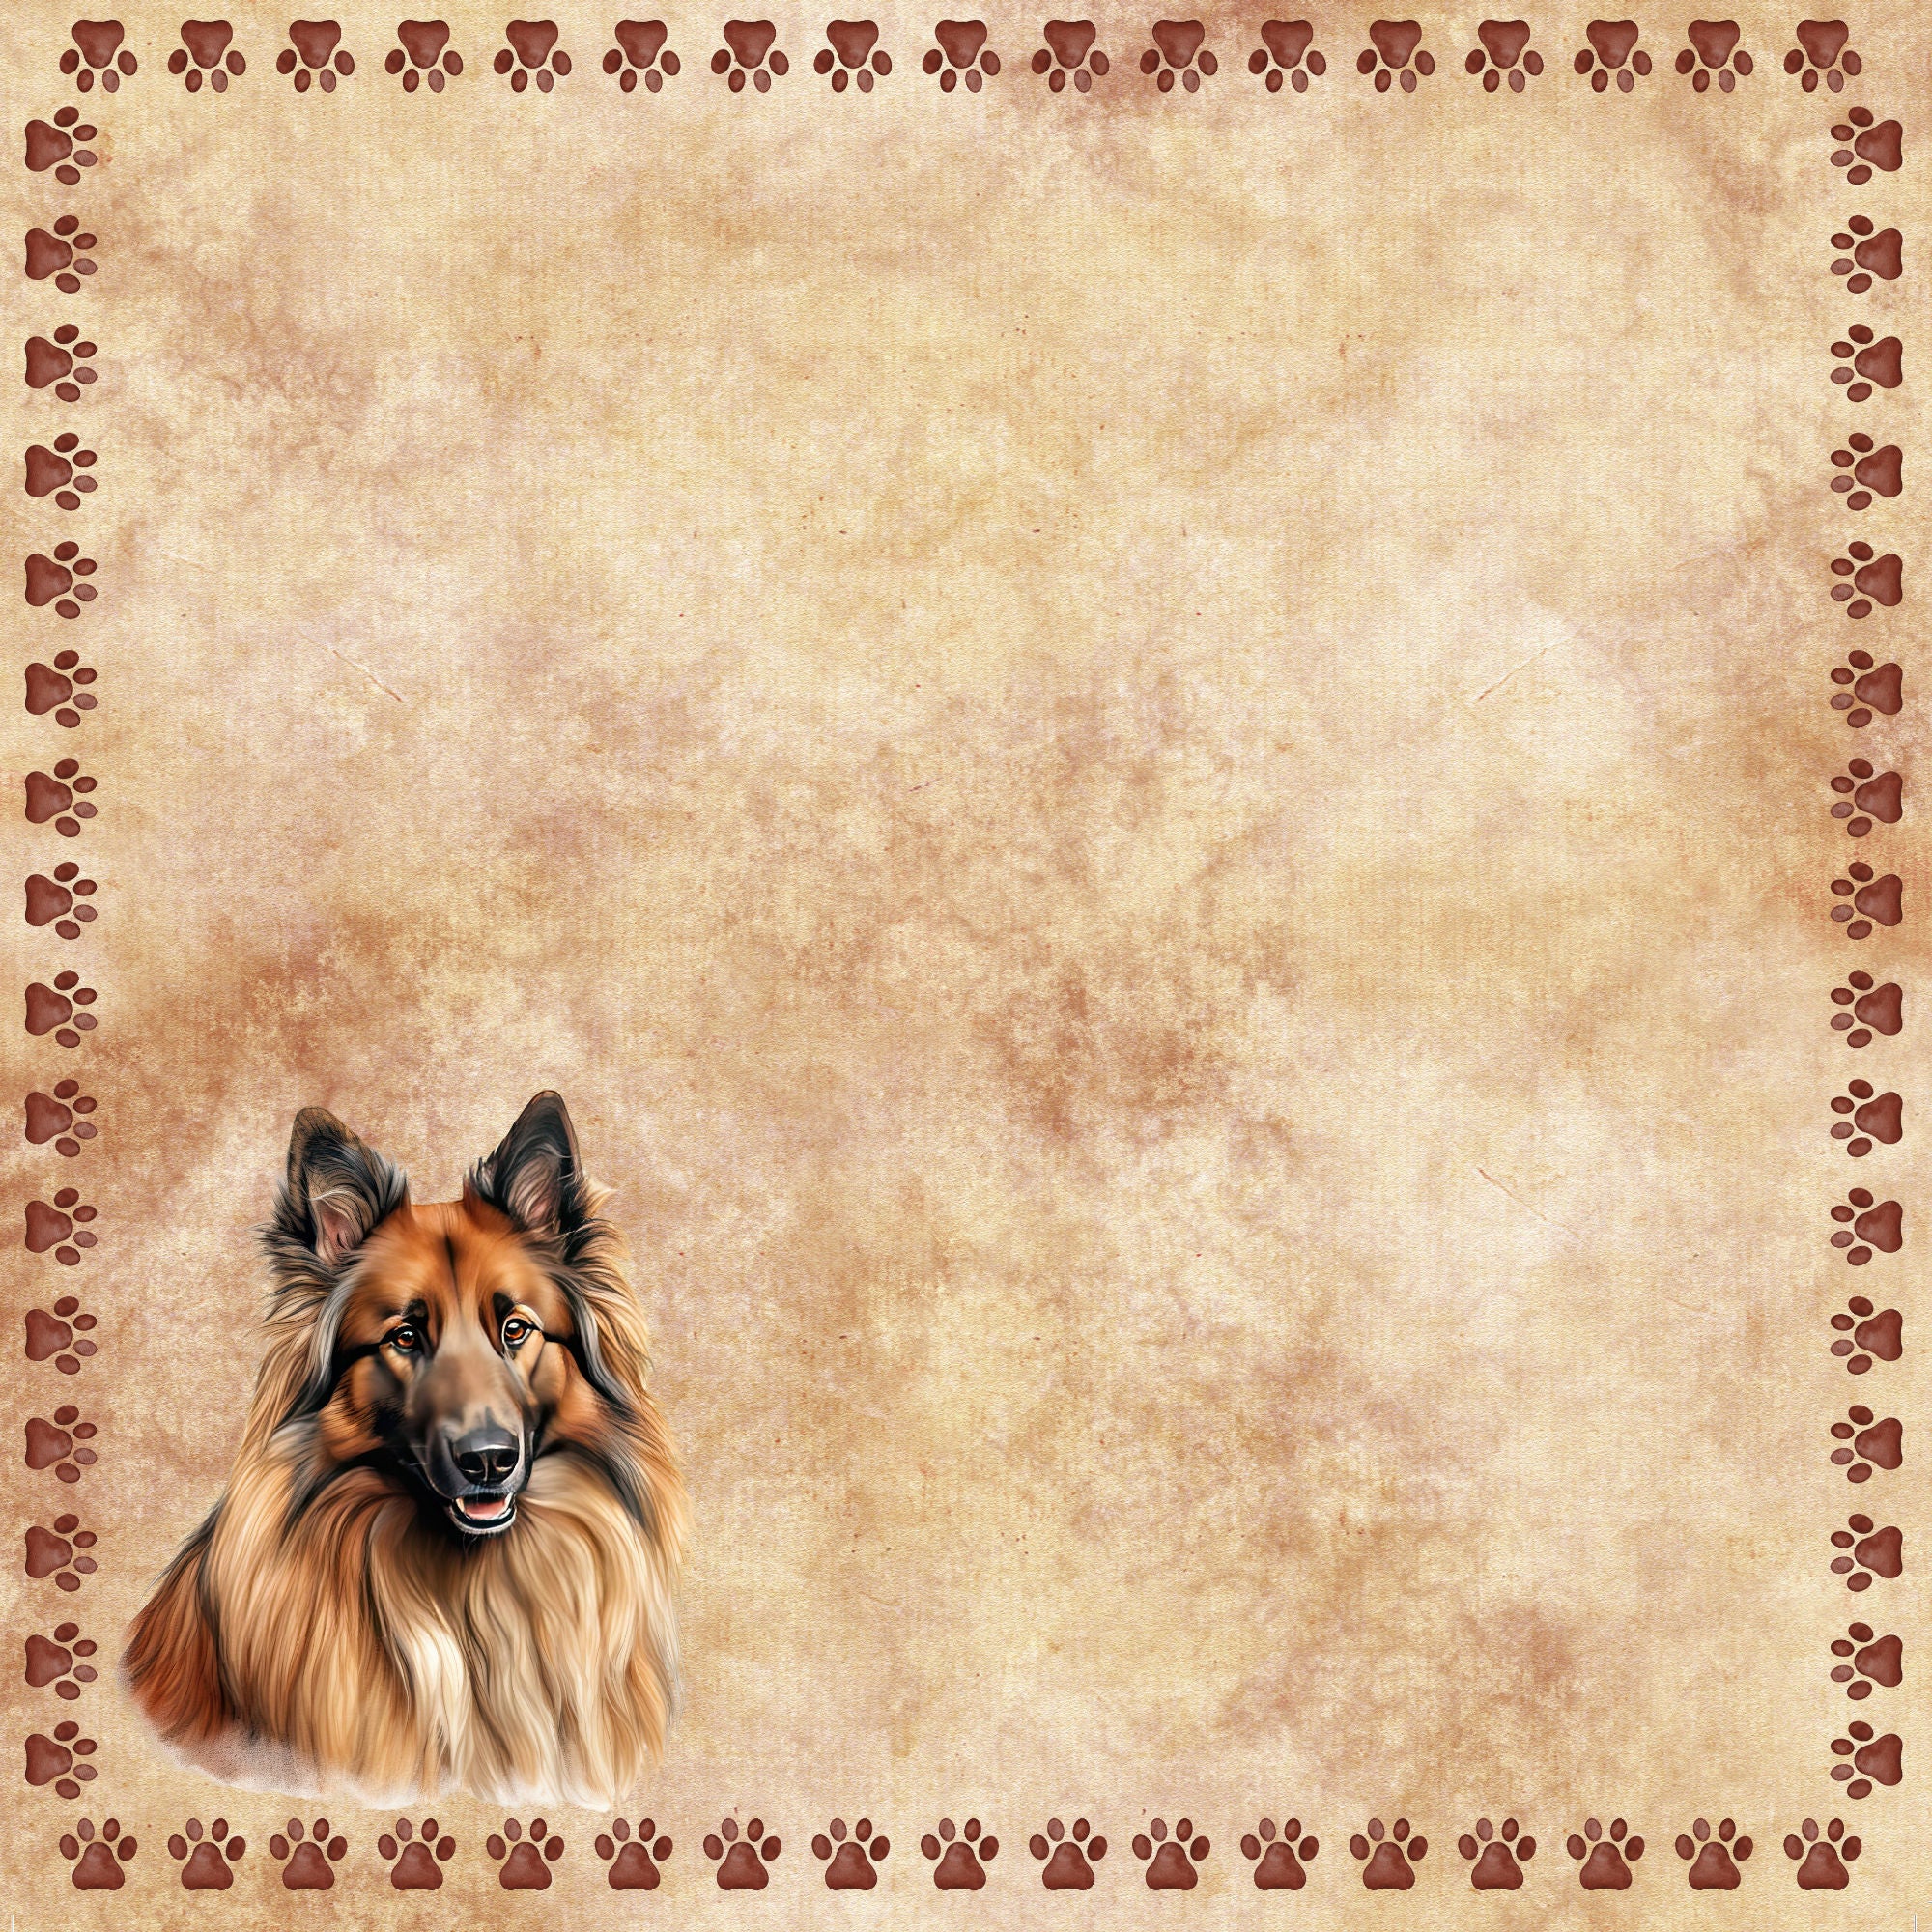 Dog Breeds Collection Belgian Shepherd 12 x 12 Double-Sided Scrapbook Paper by SSC Designs